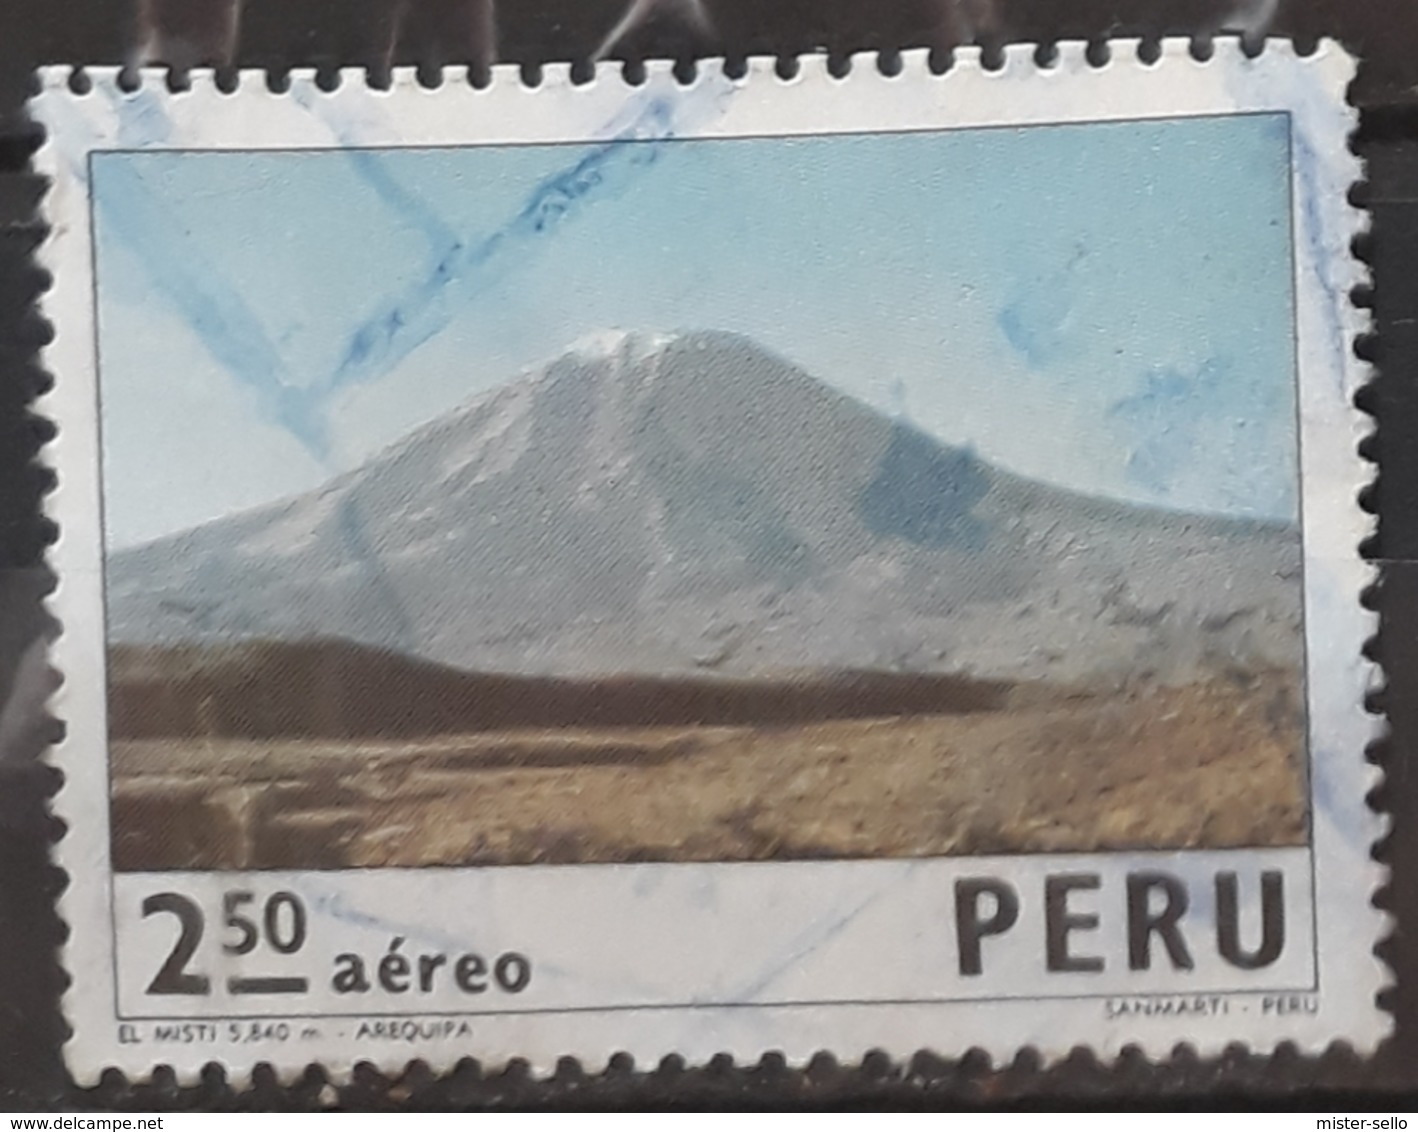 PERU 1974 Airmail - "Landscapes And Cities". USADO - USED. - Peru